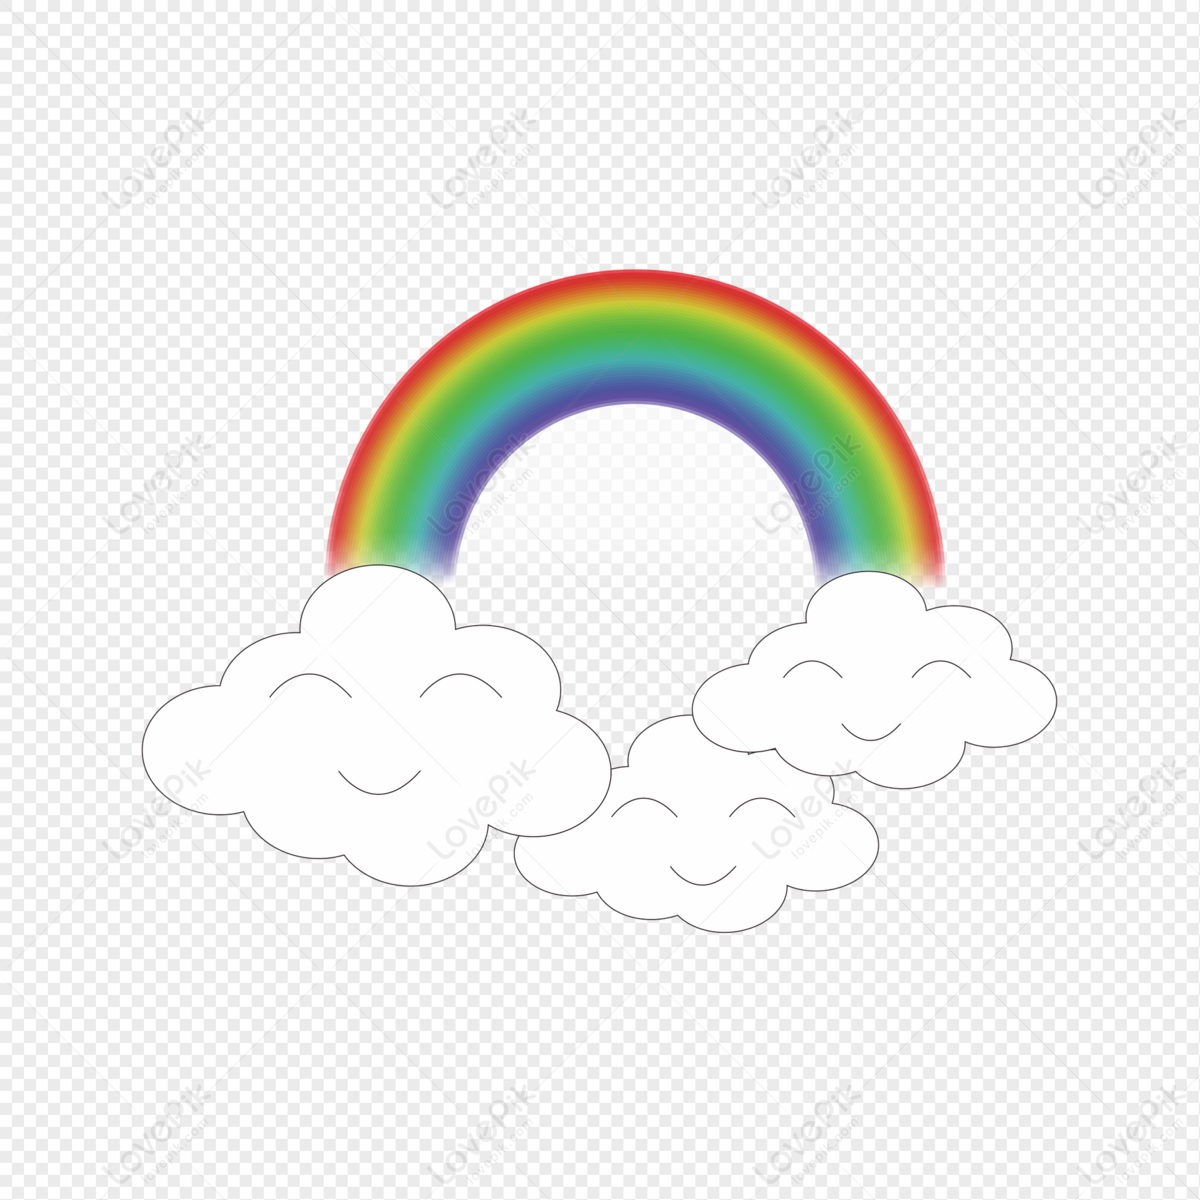 Cartoon Rainbow White Clouds PNG Image Free Download And Clipart Image For  Free Download - Lovepik | 401187431